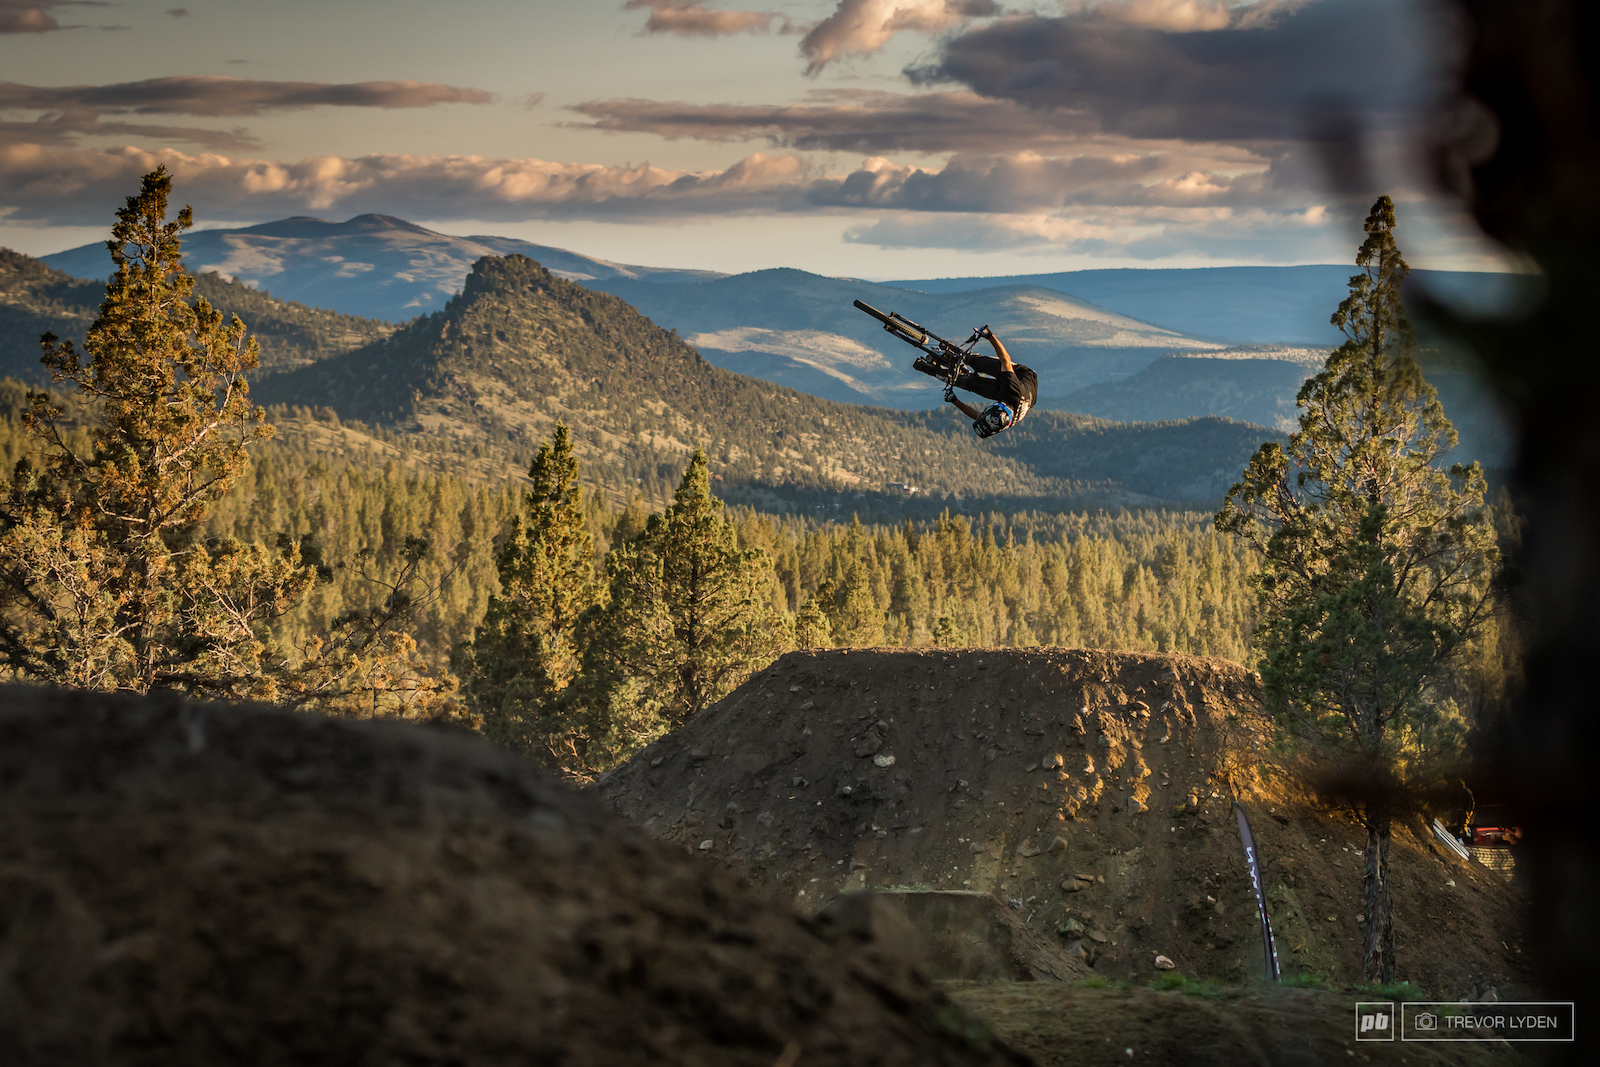 R-doggy with his signature corked out backflip into the sunset.